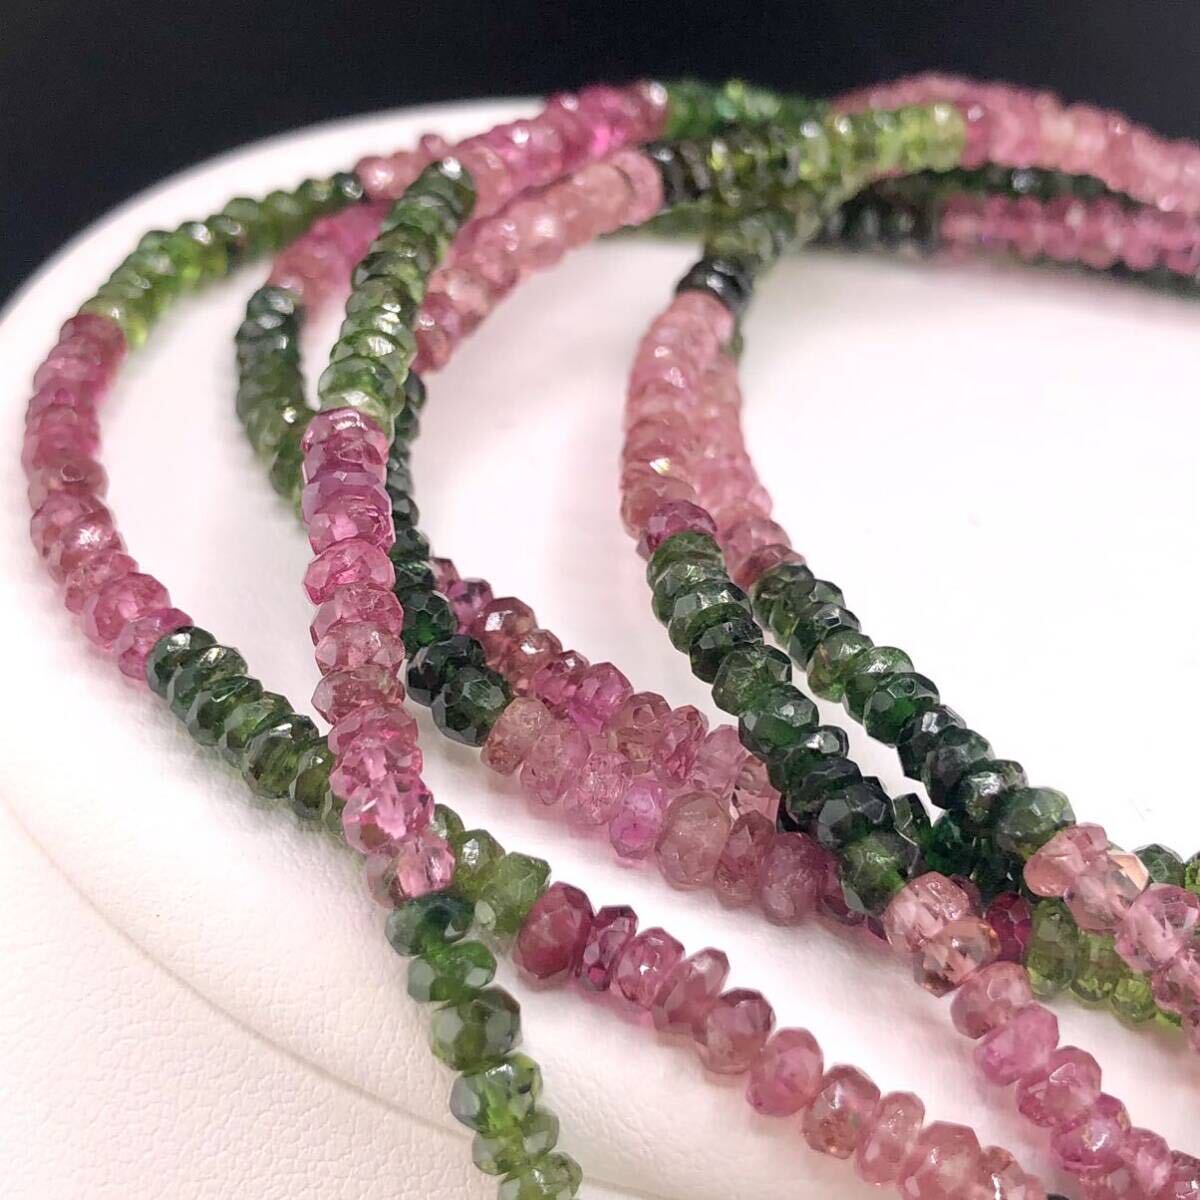 E03-7074 3連☆トルマリンネックレス 約52cm 45g ( tourmaline necklace SILVER jewelry )の画像1